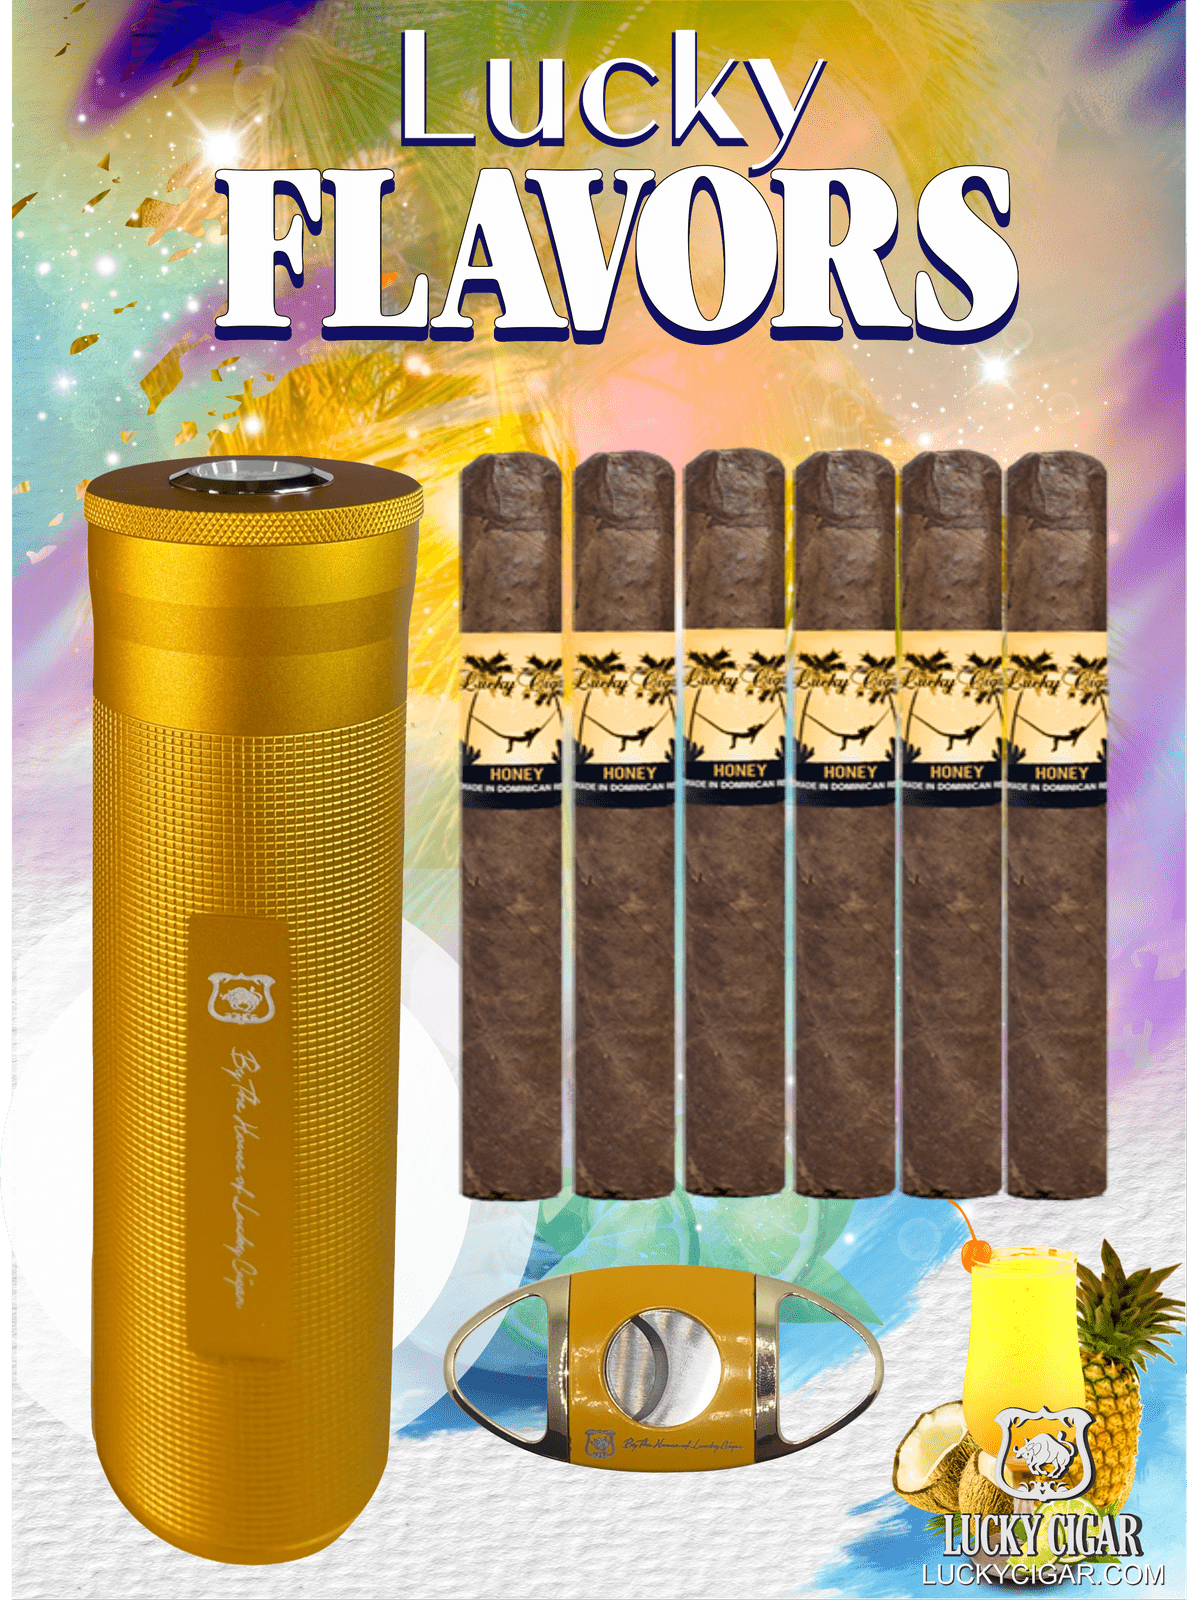 Flavored Cigars: Lucky Flavors 6 Honey Cigar Set with Travel Humidor and Cutter